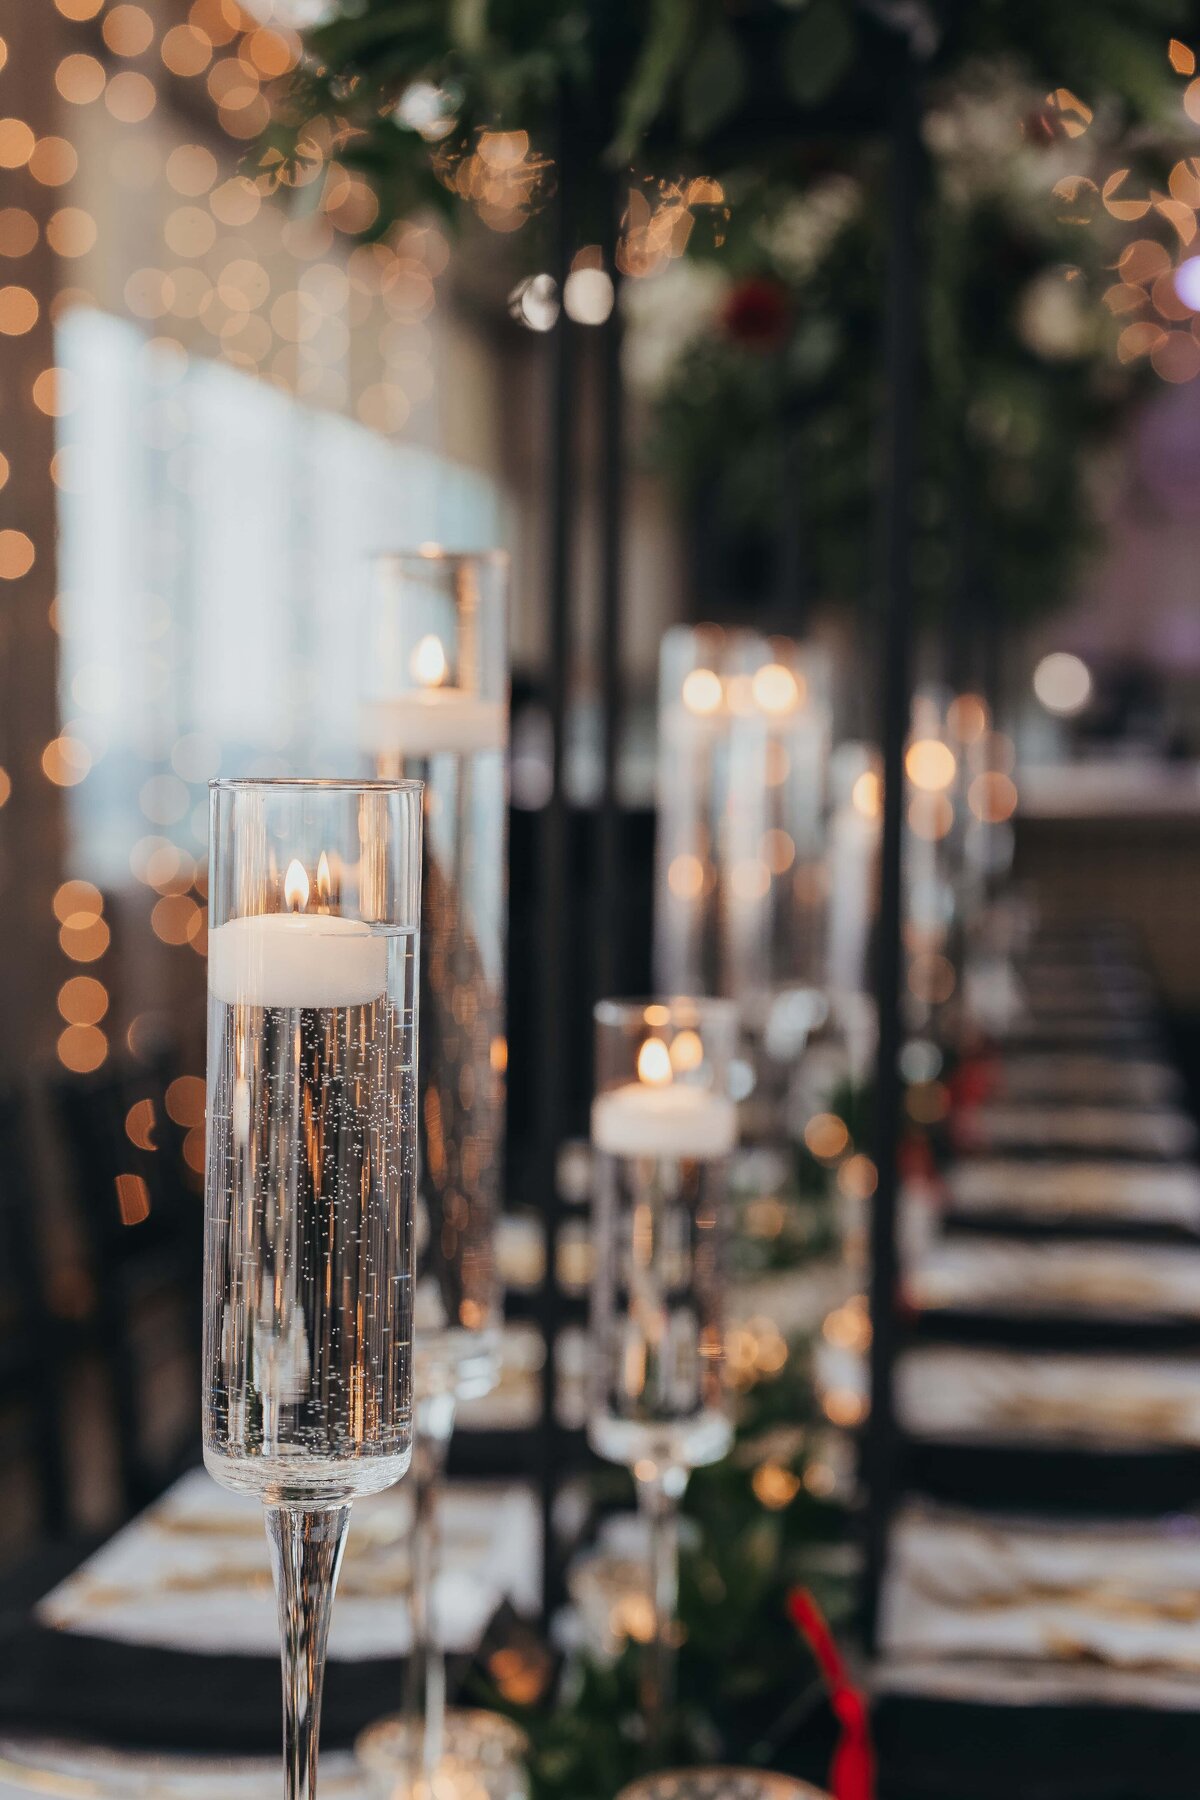 Elegant table setting with tall candle holders and lit candles, soft bokeh lights in the background at a park farm winery wedding, creating a festive atmosphere.